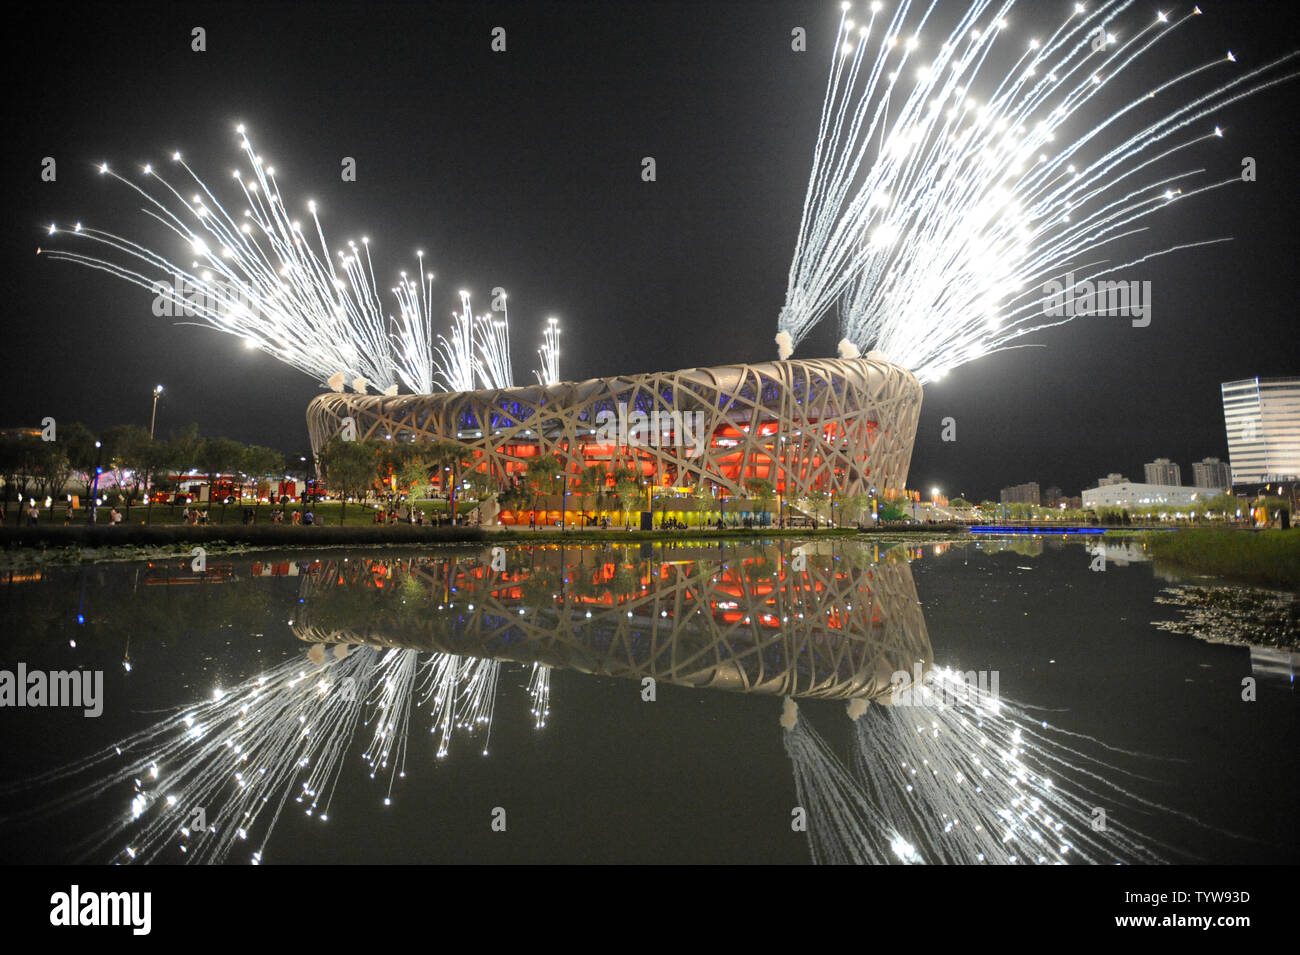 Fireworks explode over the National Stadium, called the Bird's Nest,  during the dress rehearsal for the 2008 Olympics in Beijing on August 2, 2008.  The official opening ceremony for the Summer Games is August 8, 2008.   (UPI Photo/Pat Benic) Stock Photo